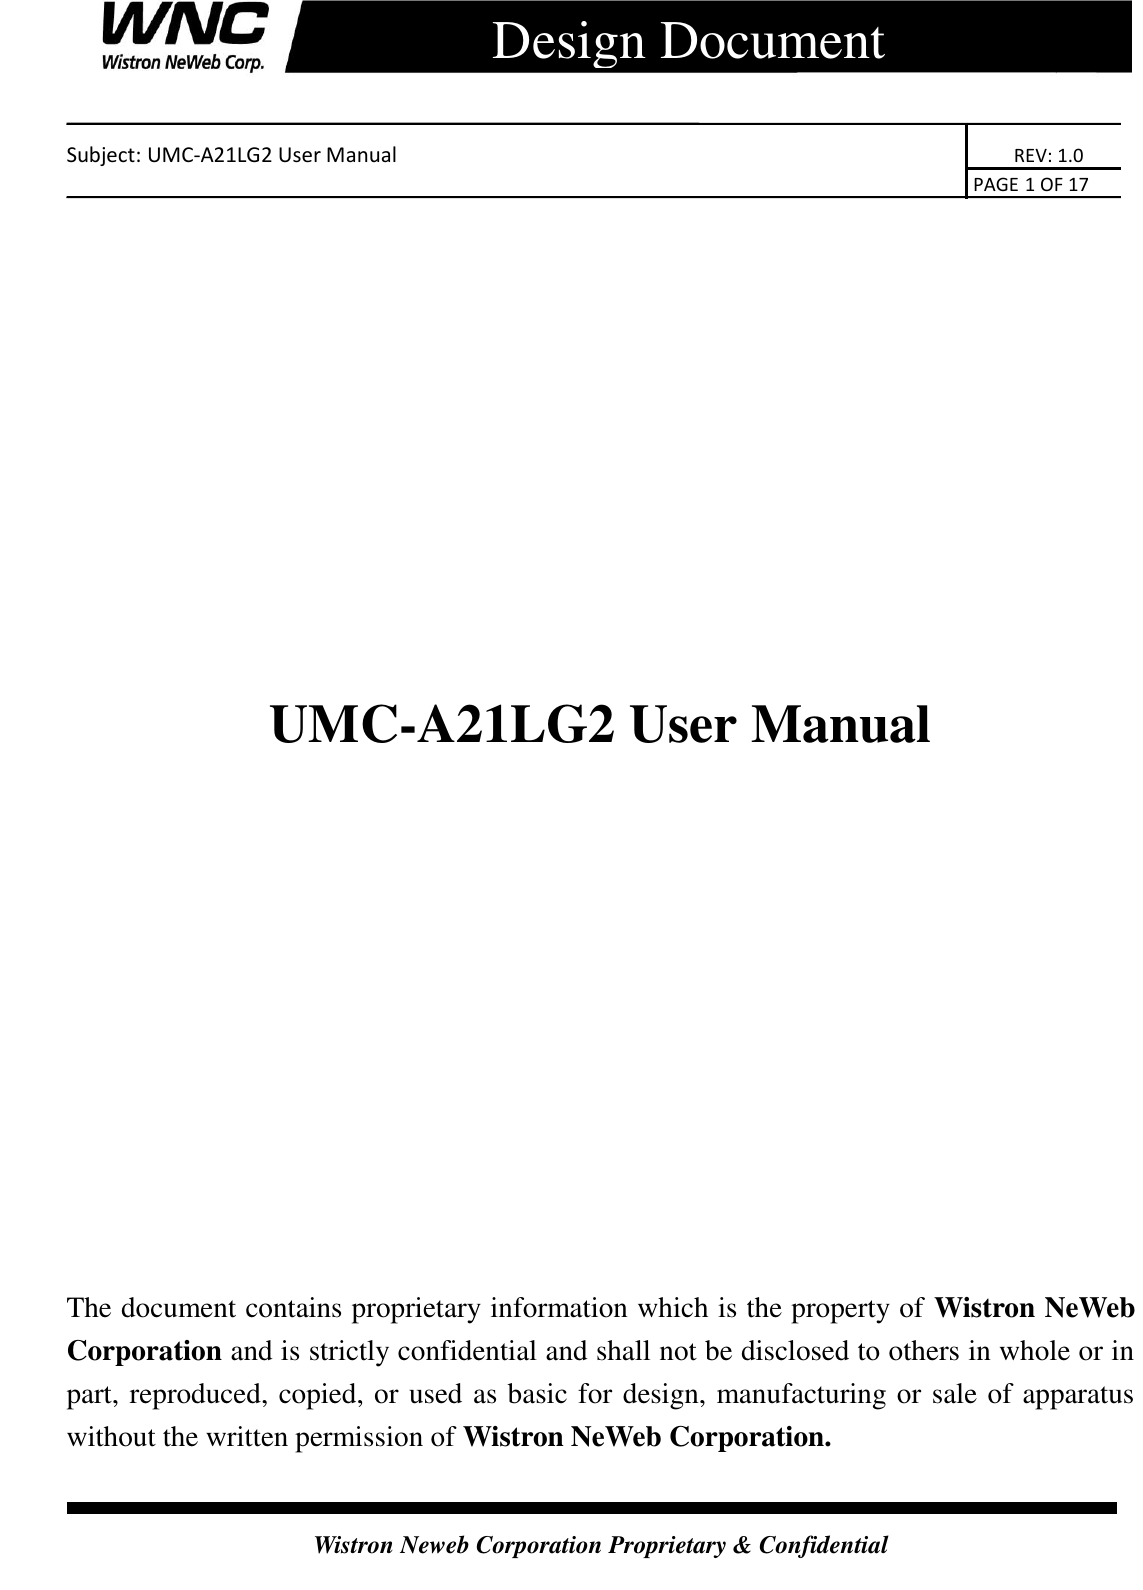    Subject: UMC-A21LG2 User Manual                                                                      REV: 1.0                                                                                        PAGE 1 OF 17  Wistron Neweb Corporation Proprietary &amp; Confidential      Design Document              UMC-A21LG2 User Manual               The document contains proprietary information which is the property of Wistron NeWeb Corporation and is strictly confidential and shall not be disclosed to others in whole or in part, reproduced, copied, or used as basic for design, manufacturing or sale of apparatus without the written permission of Wistron NeWeb Corporation.